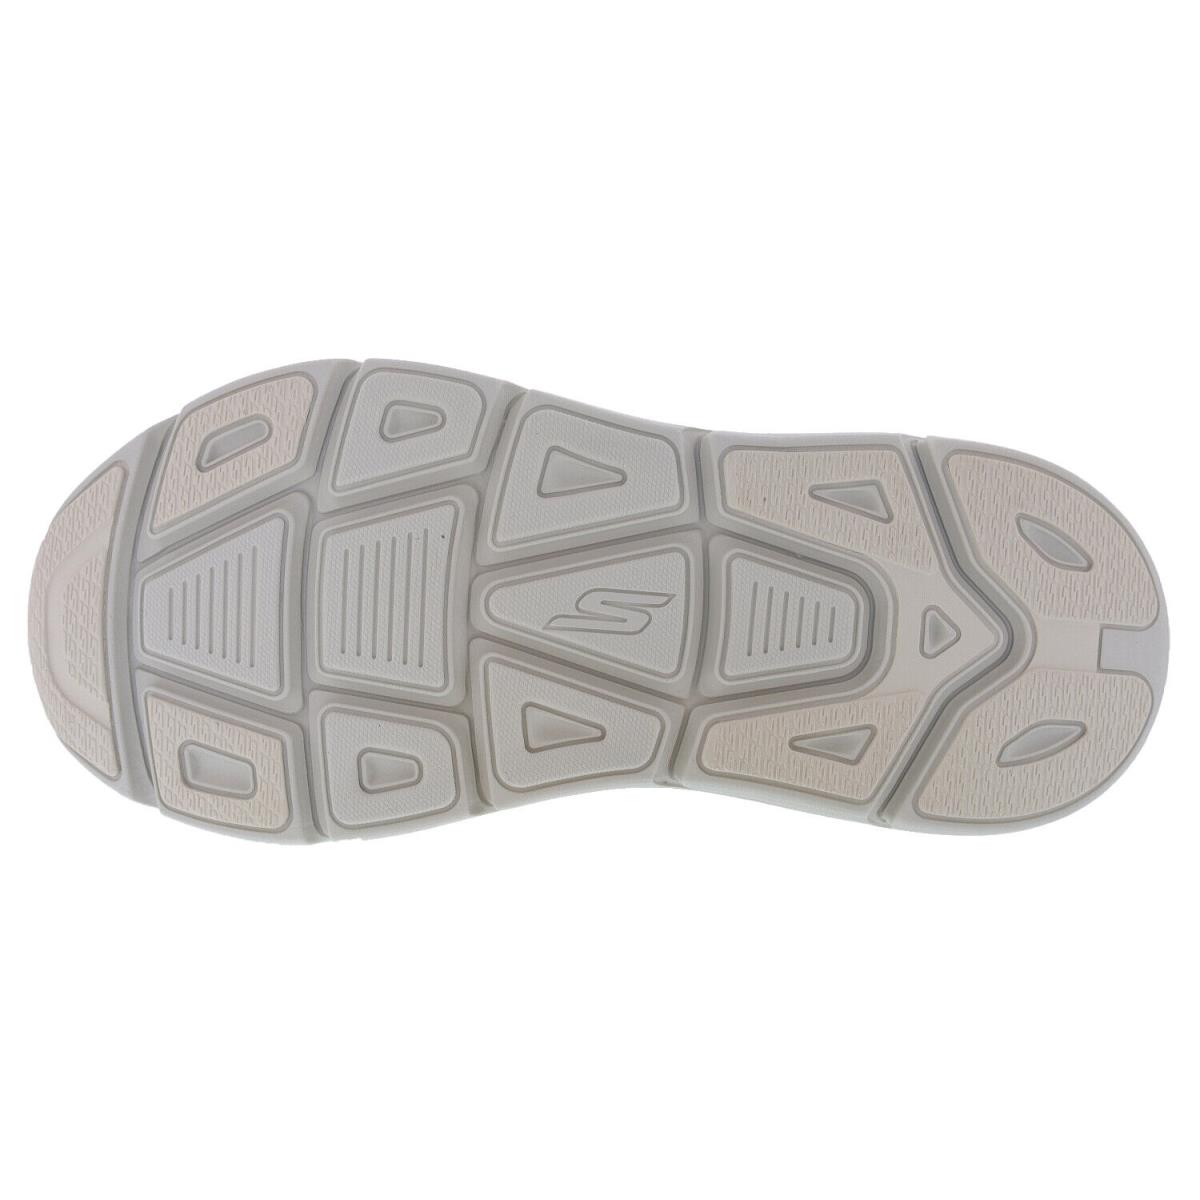 Skechers shoes MAX CUSHIONING PREMIER 3